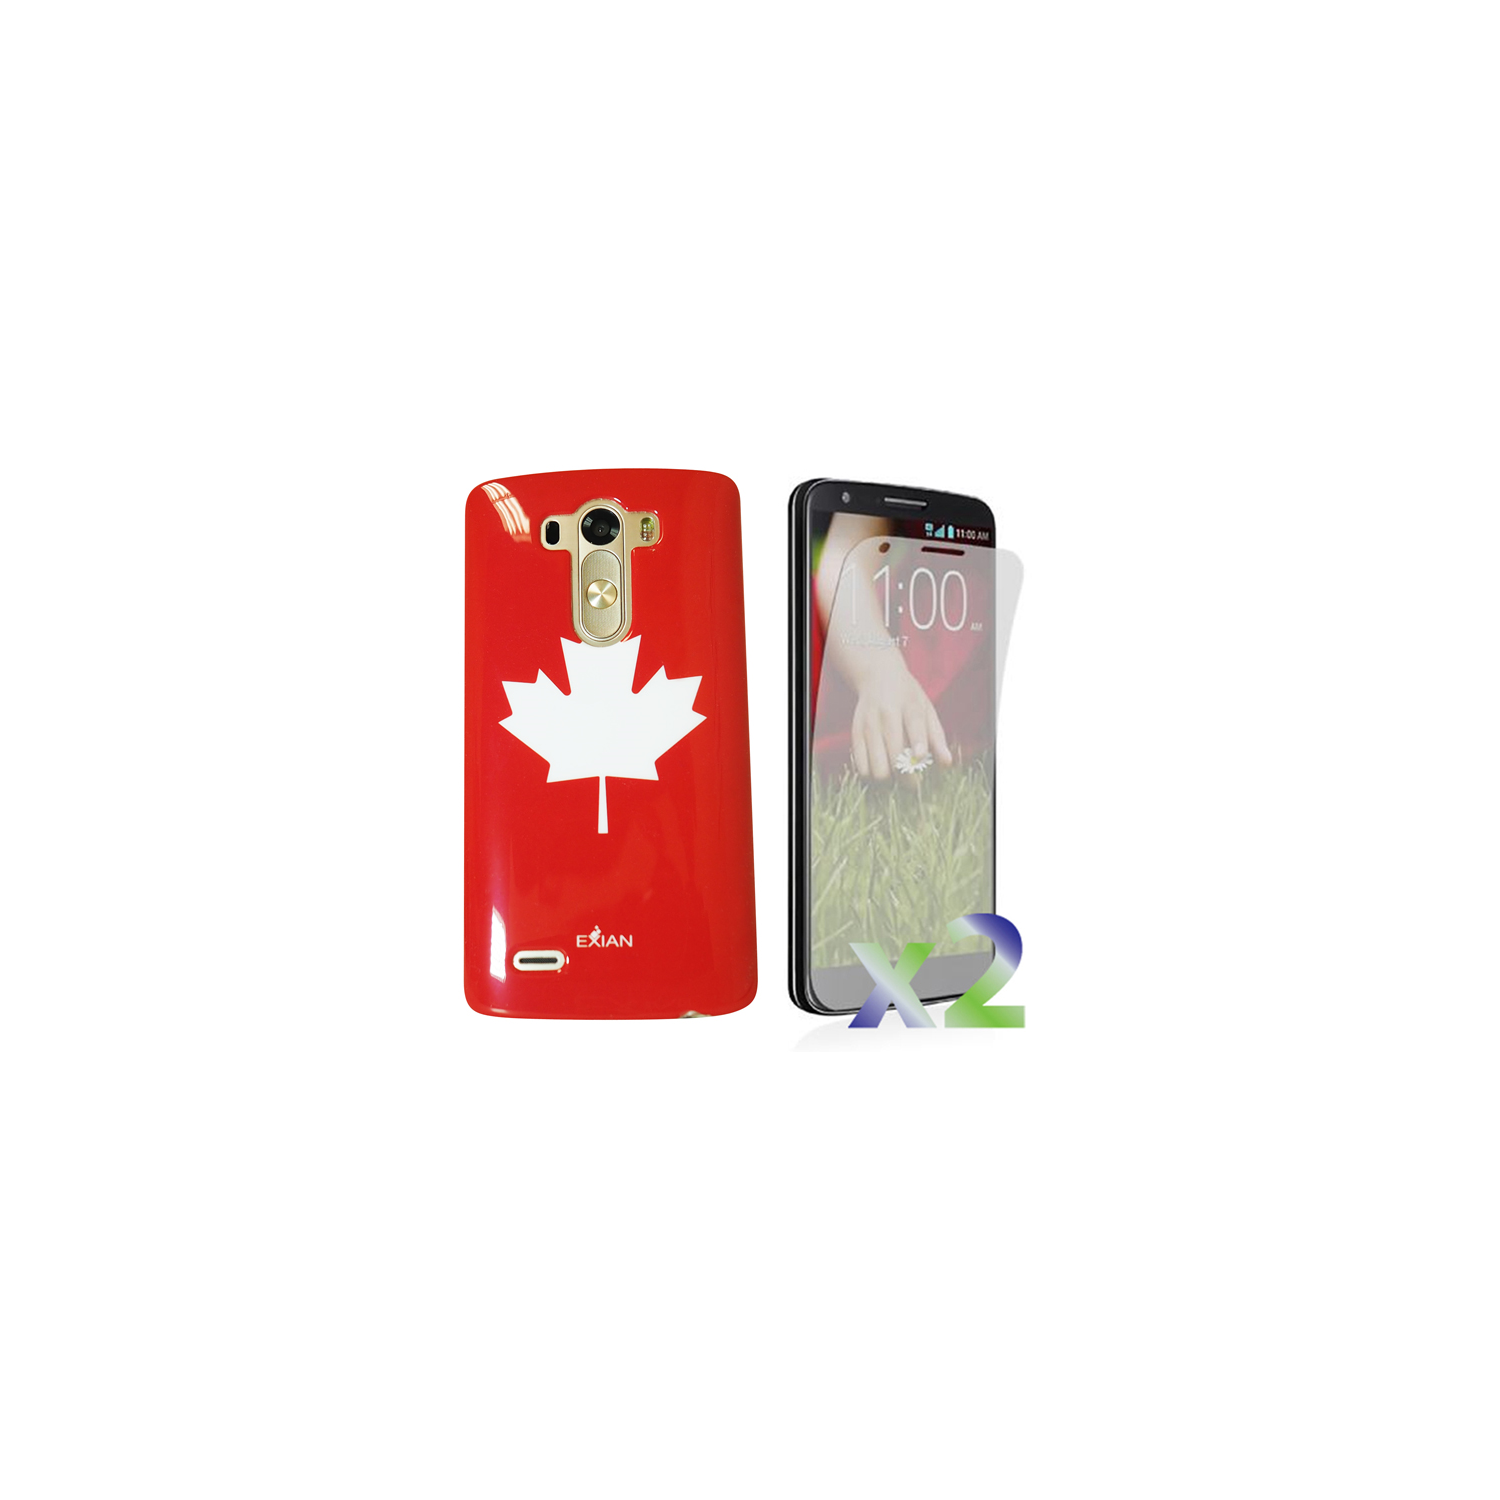 Exian LG G3 Screen Protectors X 2 and TPU Case Exian Design Maple Leaf Red